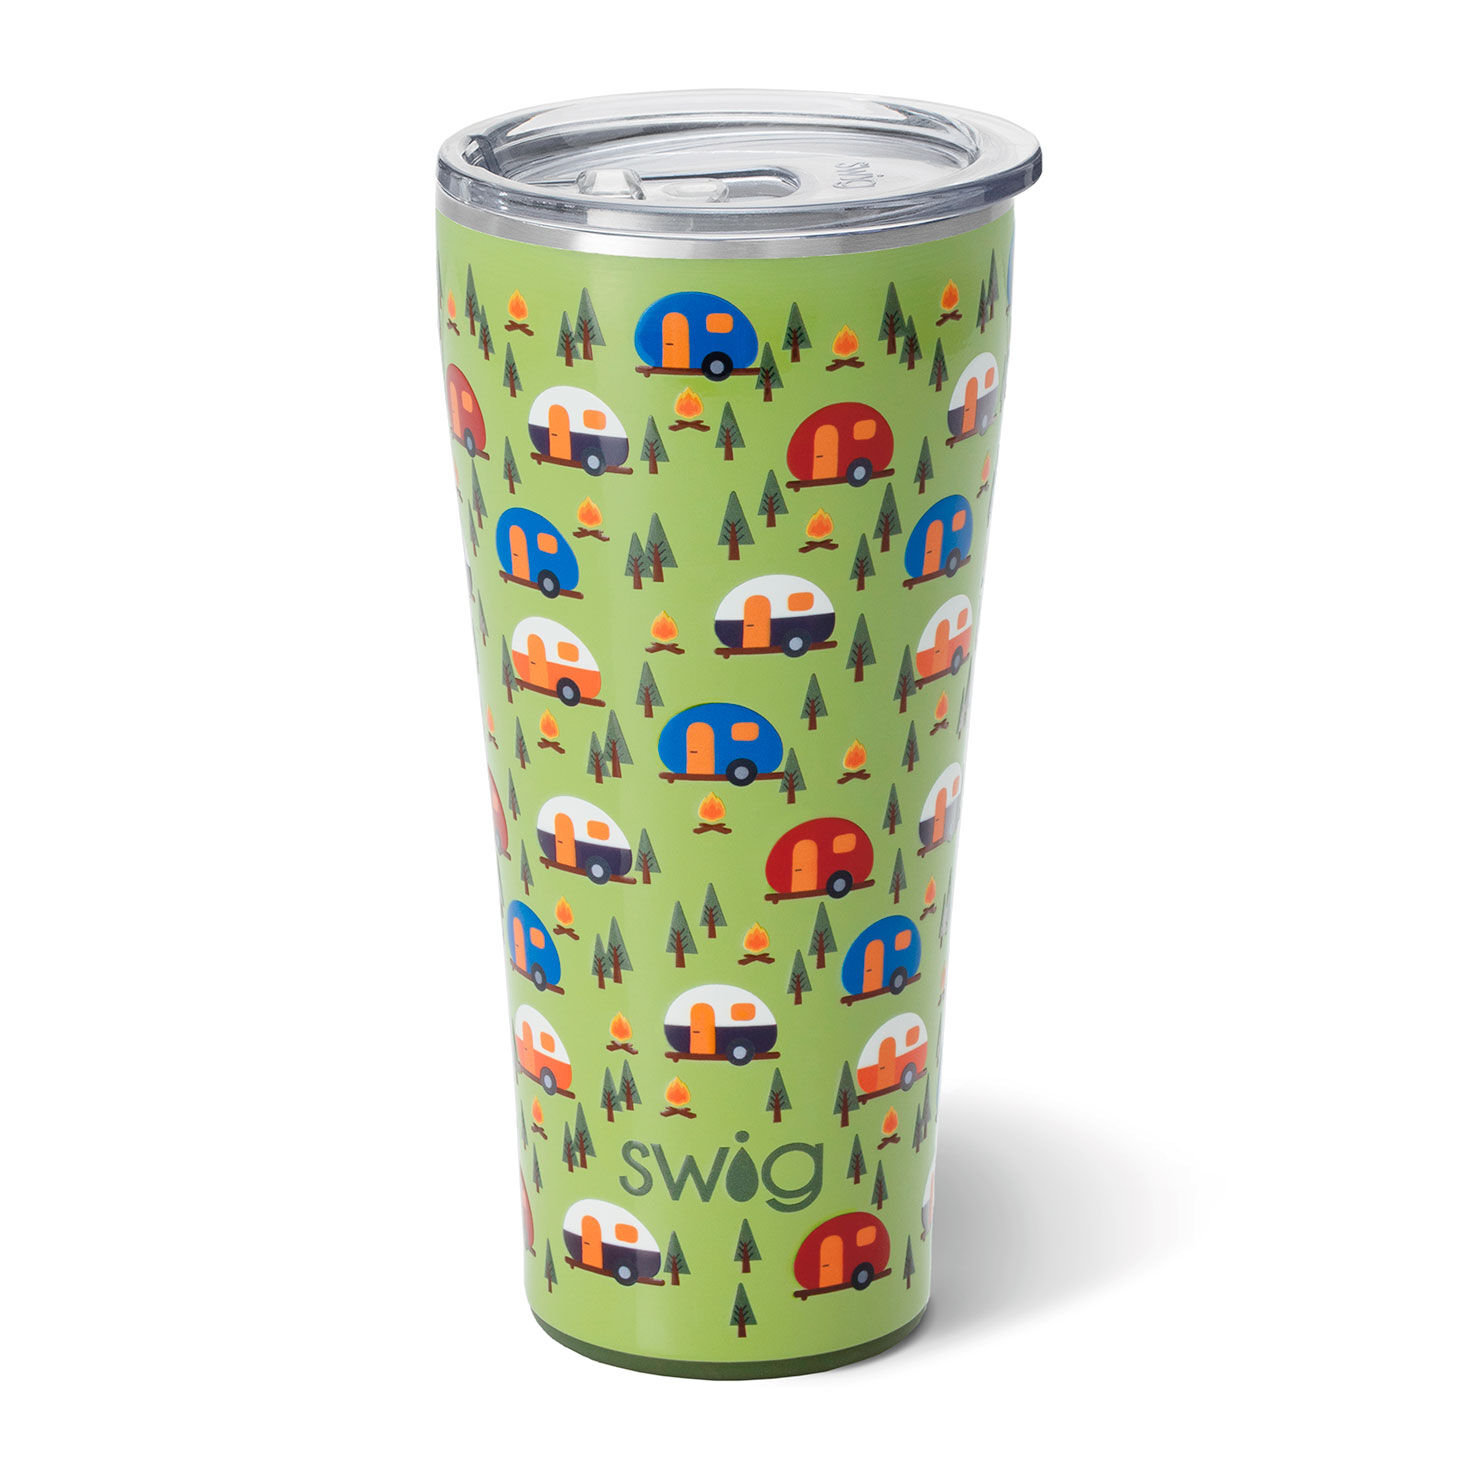 https://www.hallmark.com/dw/image/v2/AALB_PRD/on/demandware.static/-/Sites-hallmark-master/default/dwa2c0e49f/images/finished-goods/products/S102C32HC/Travel-Campers-and-Trees-Insulated-Drinking-Glass_S102C32HC_01.jpg?sfrm=jpg